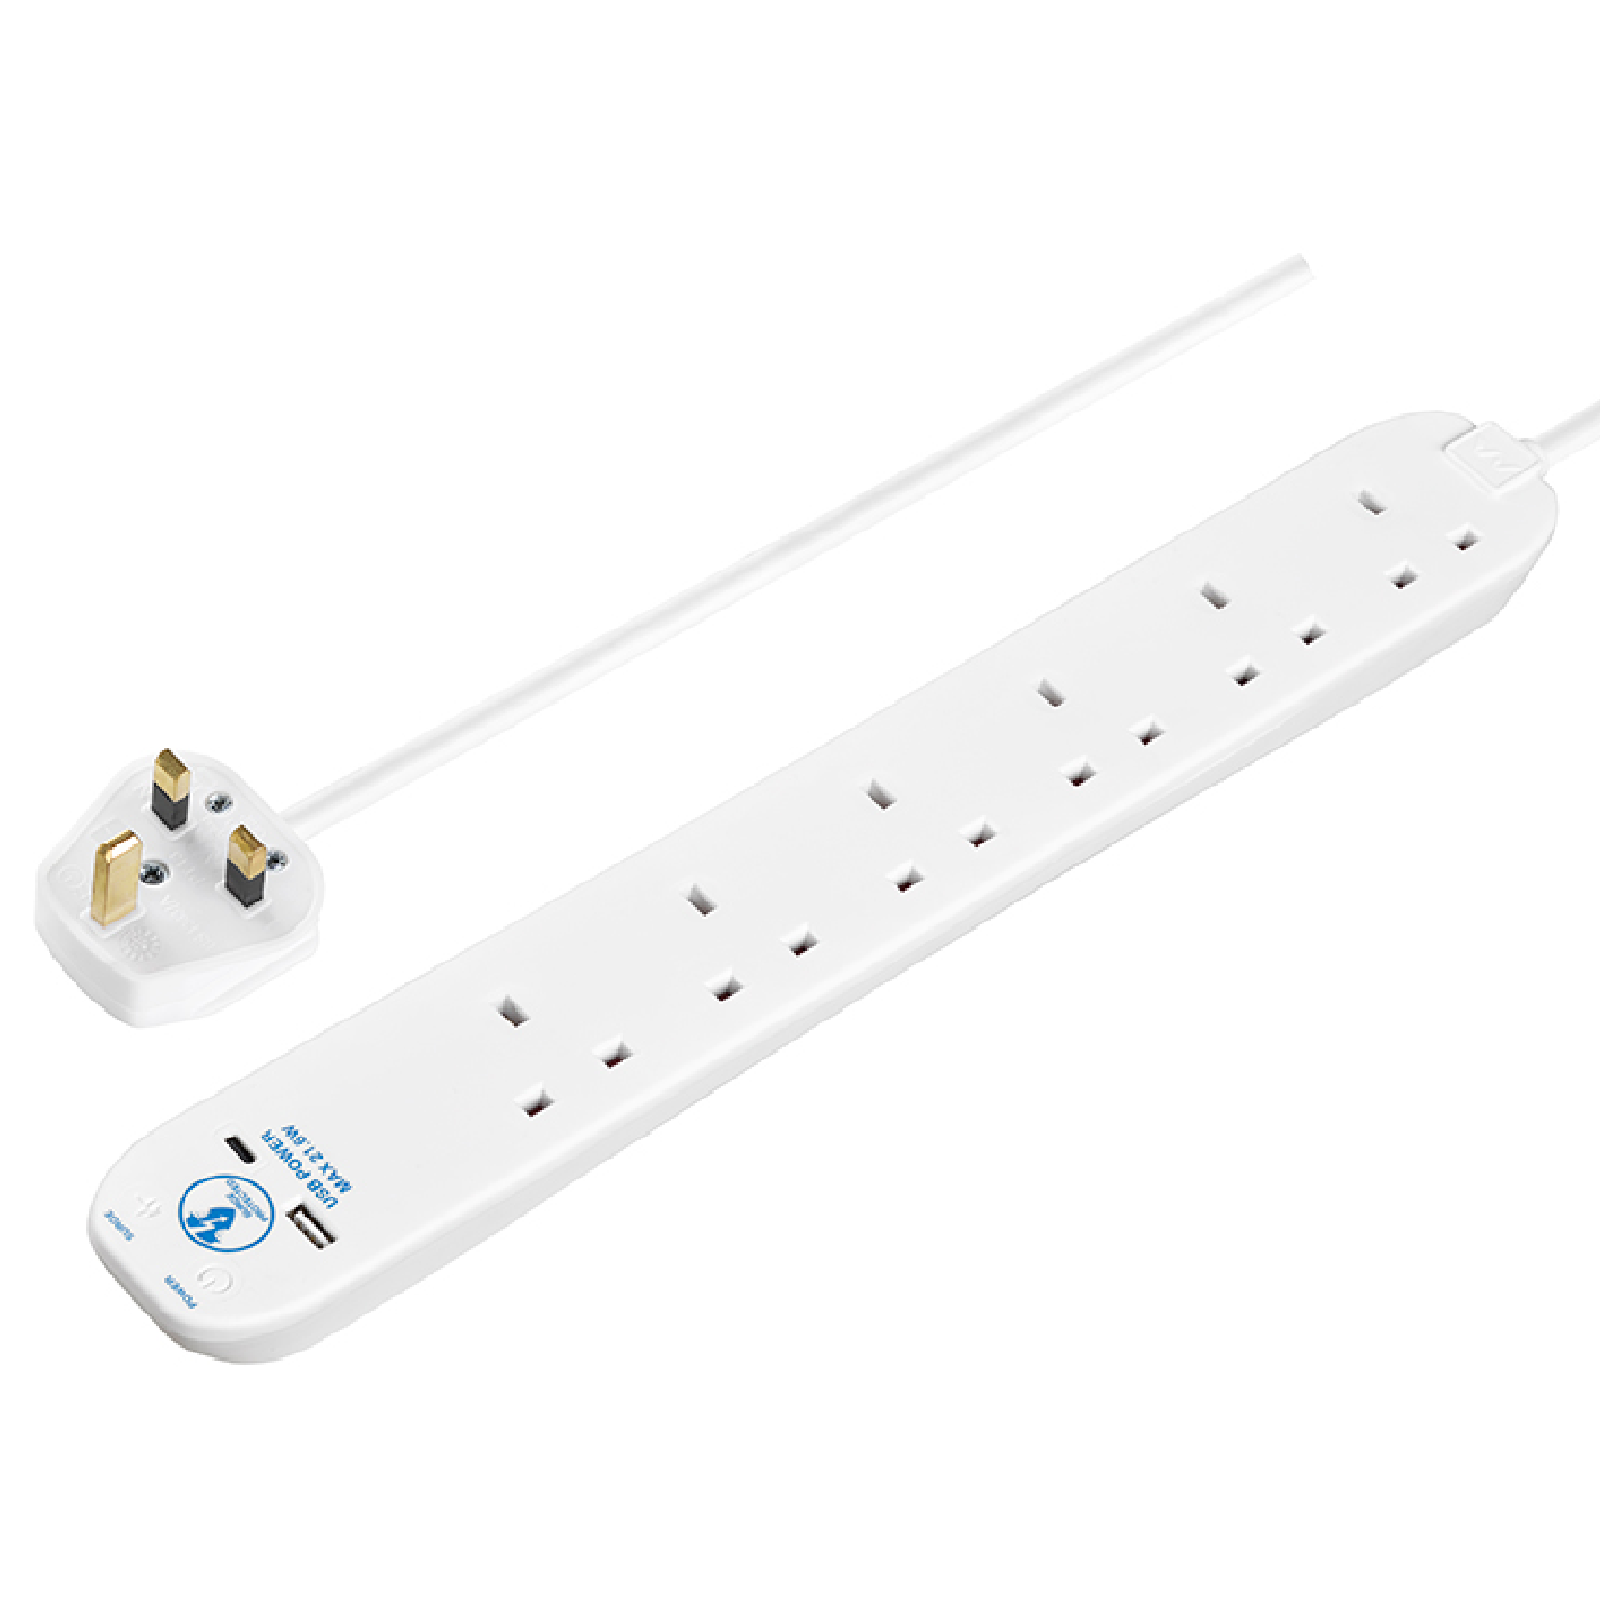 Masterplug 6 Gang Socket Surge Extension 2M WHITE With USB TYPE A & C PD22W MAX SRGUAC2262N